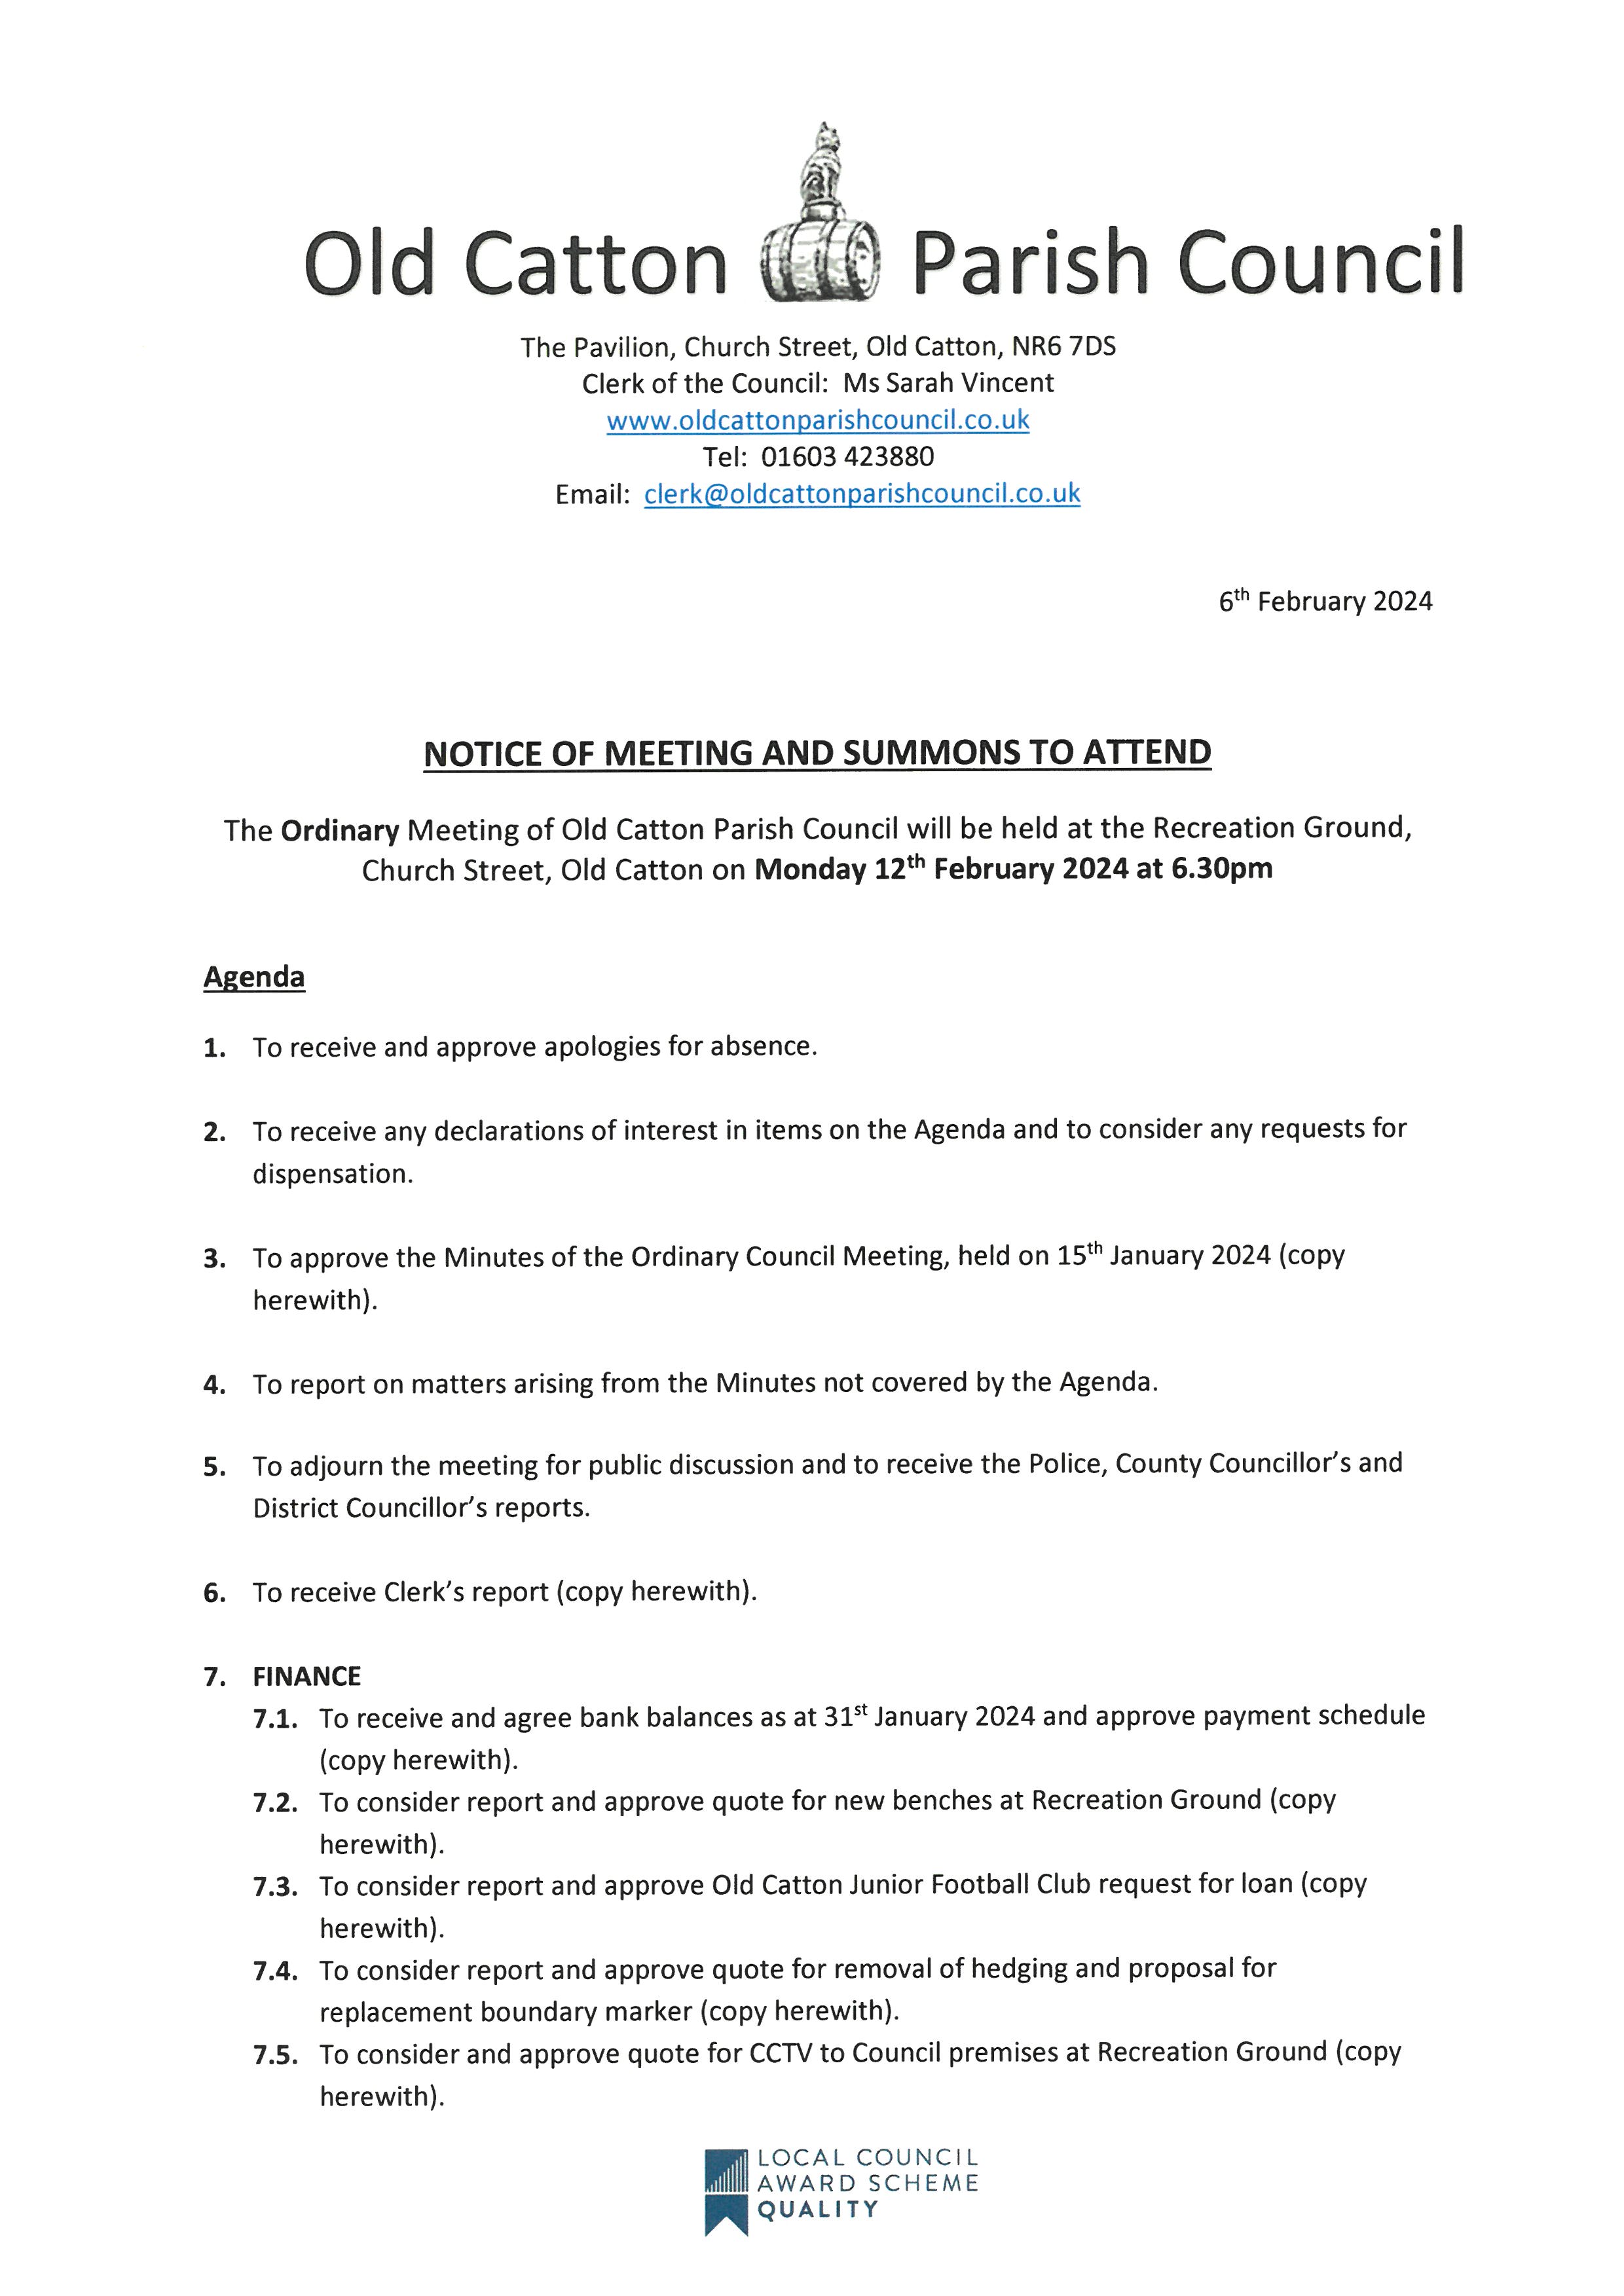 Ordinary Meeting of Old Catton Parish Council 12th February 2024